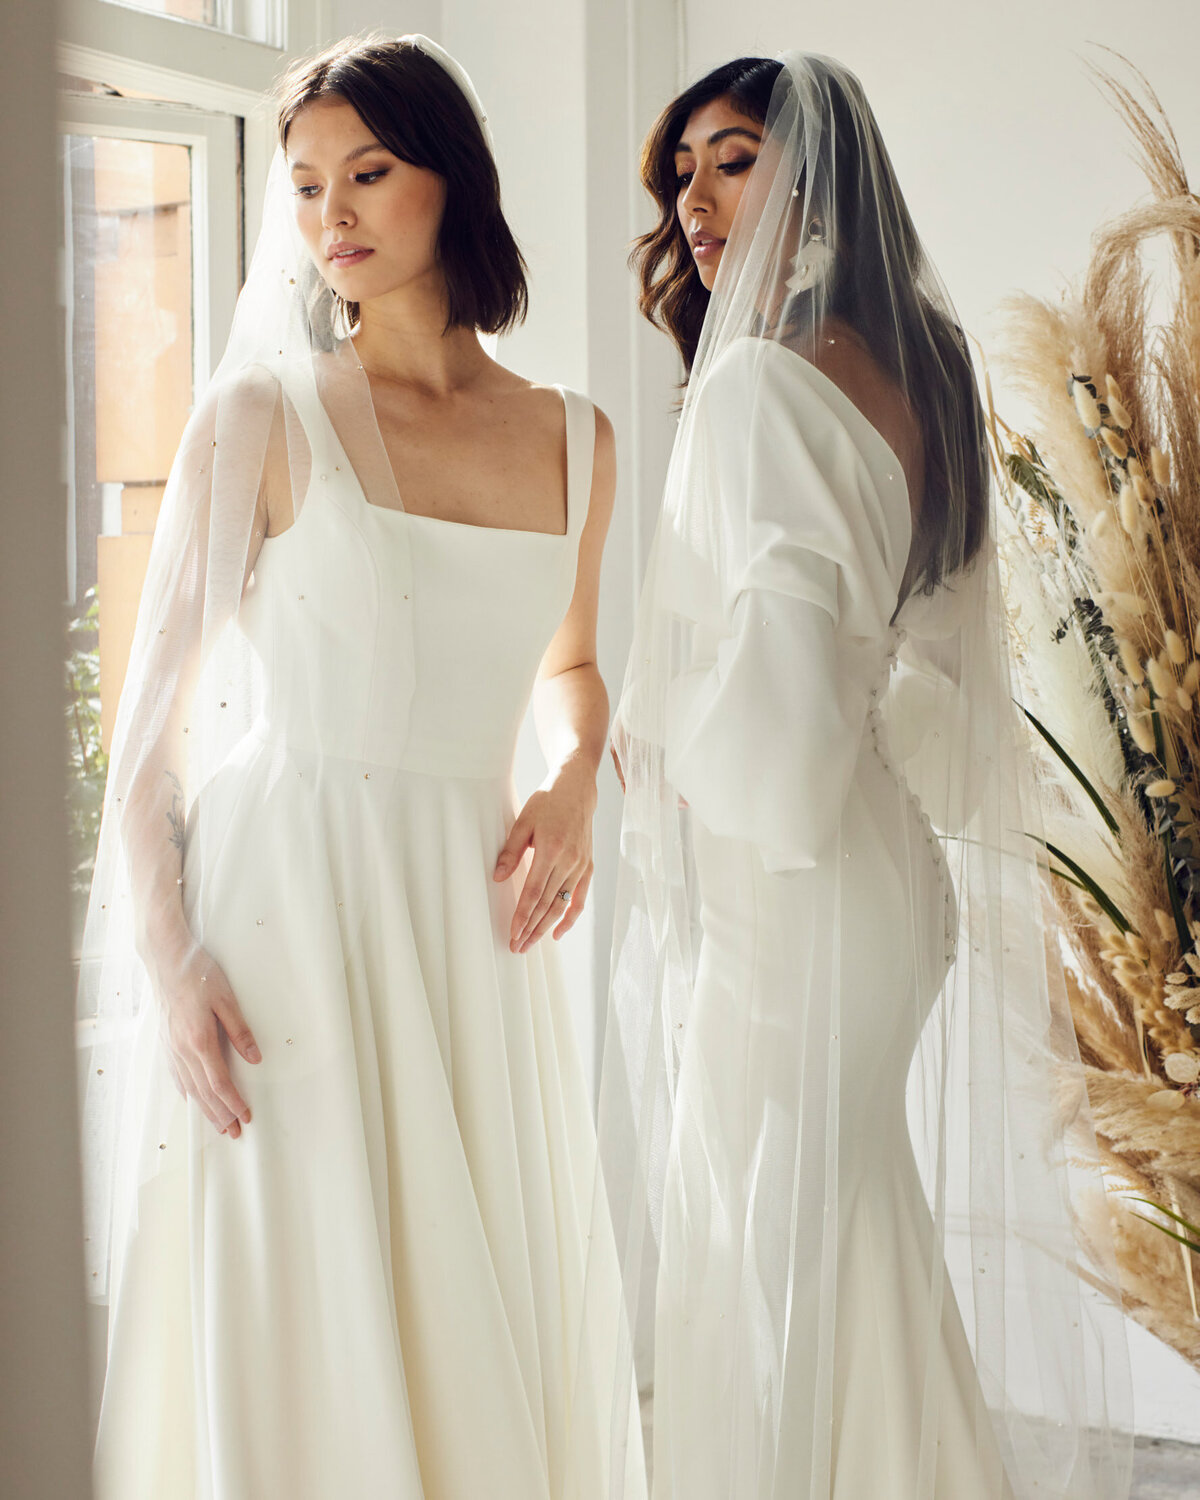 Beautiful bridal gowns from Lovenote Bride, a modern bridal boutique based in Calgary + Vancouver. Featured on the Brontë Bride Vendor Guide.